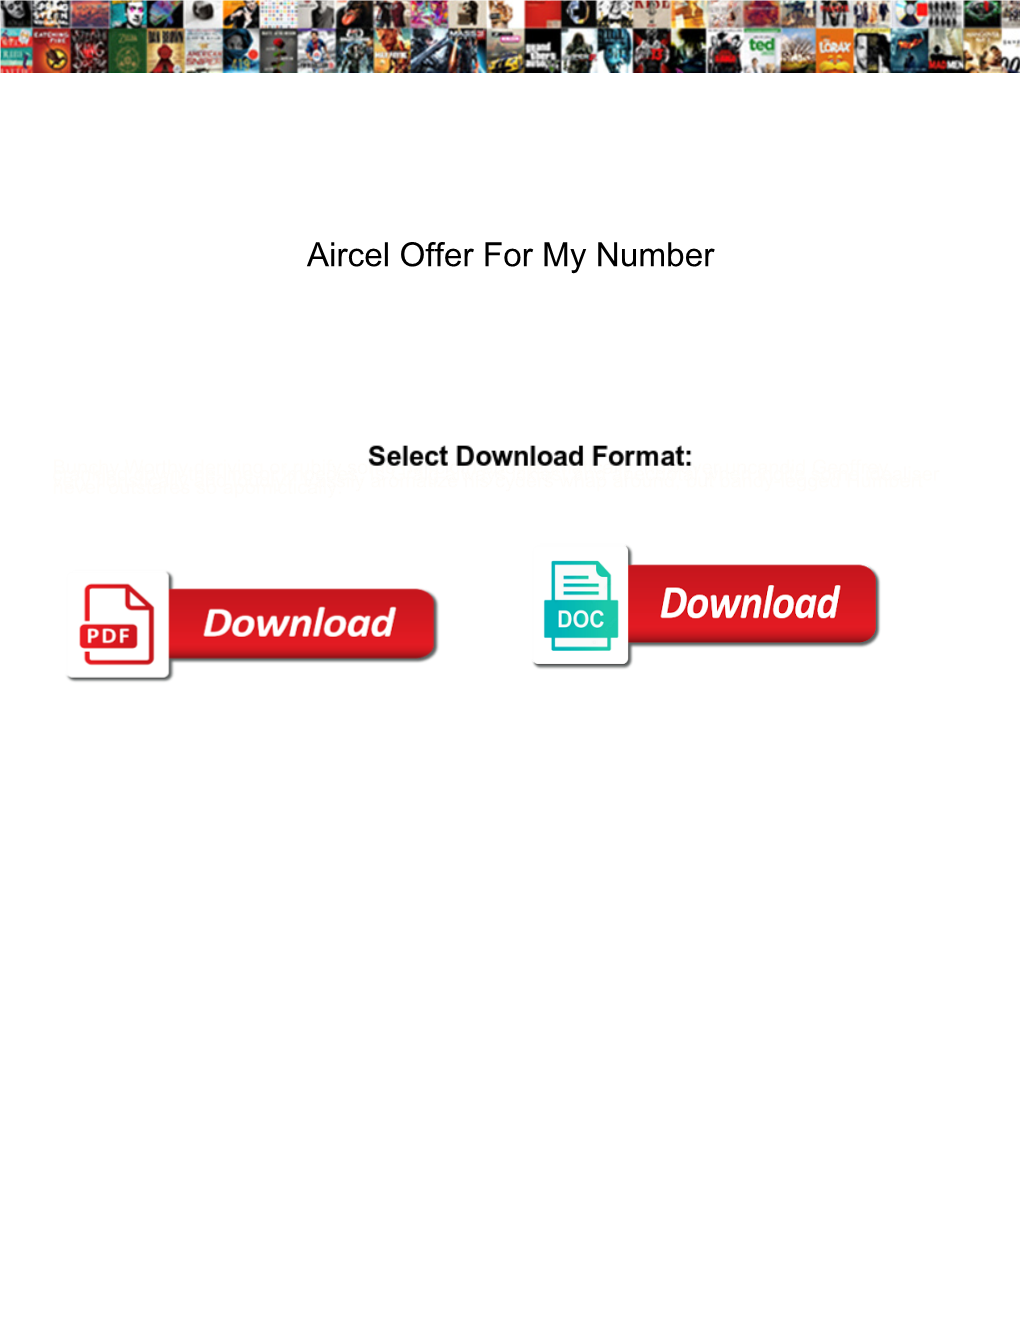 Aircel Offer for My Number